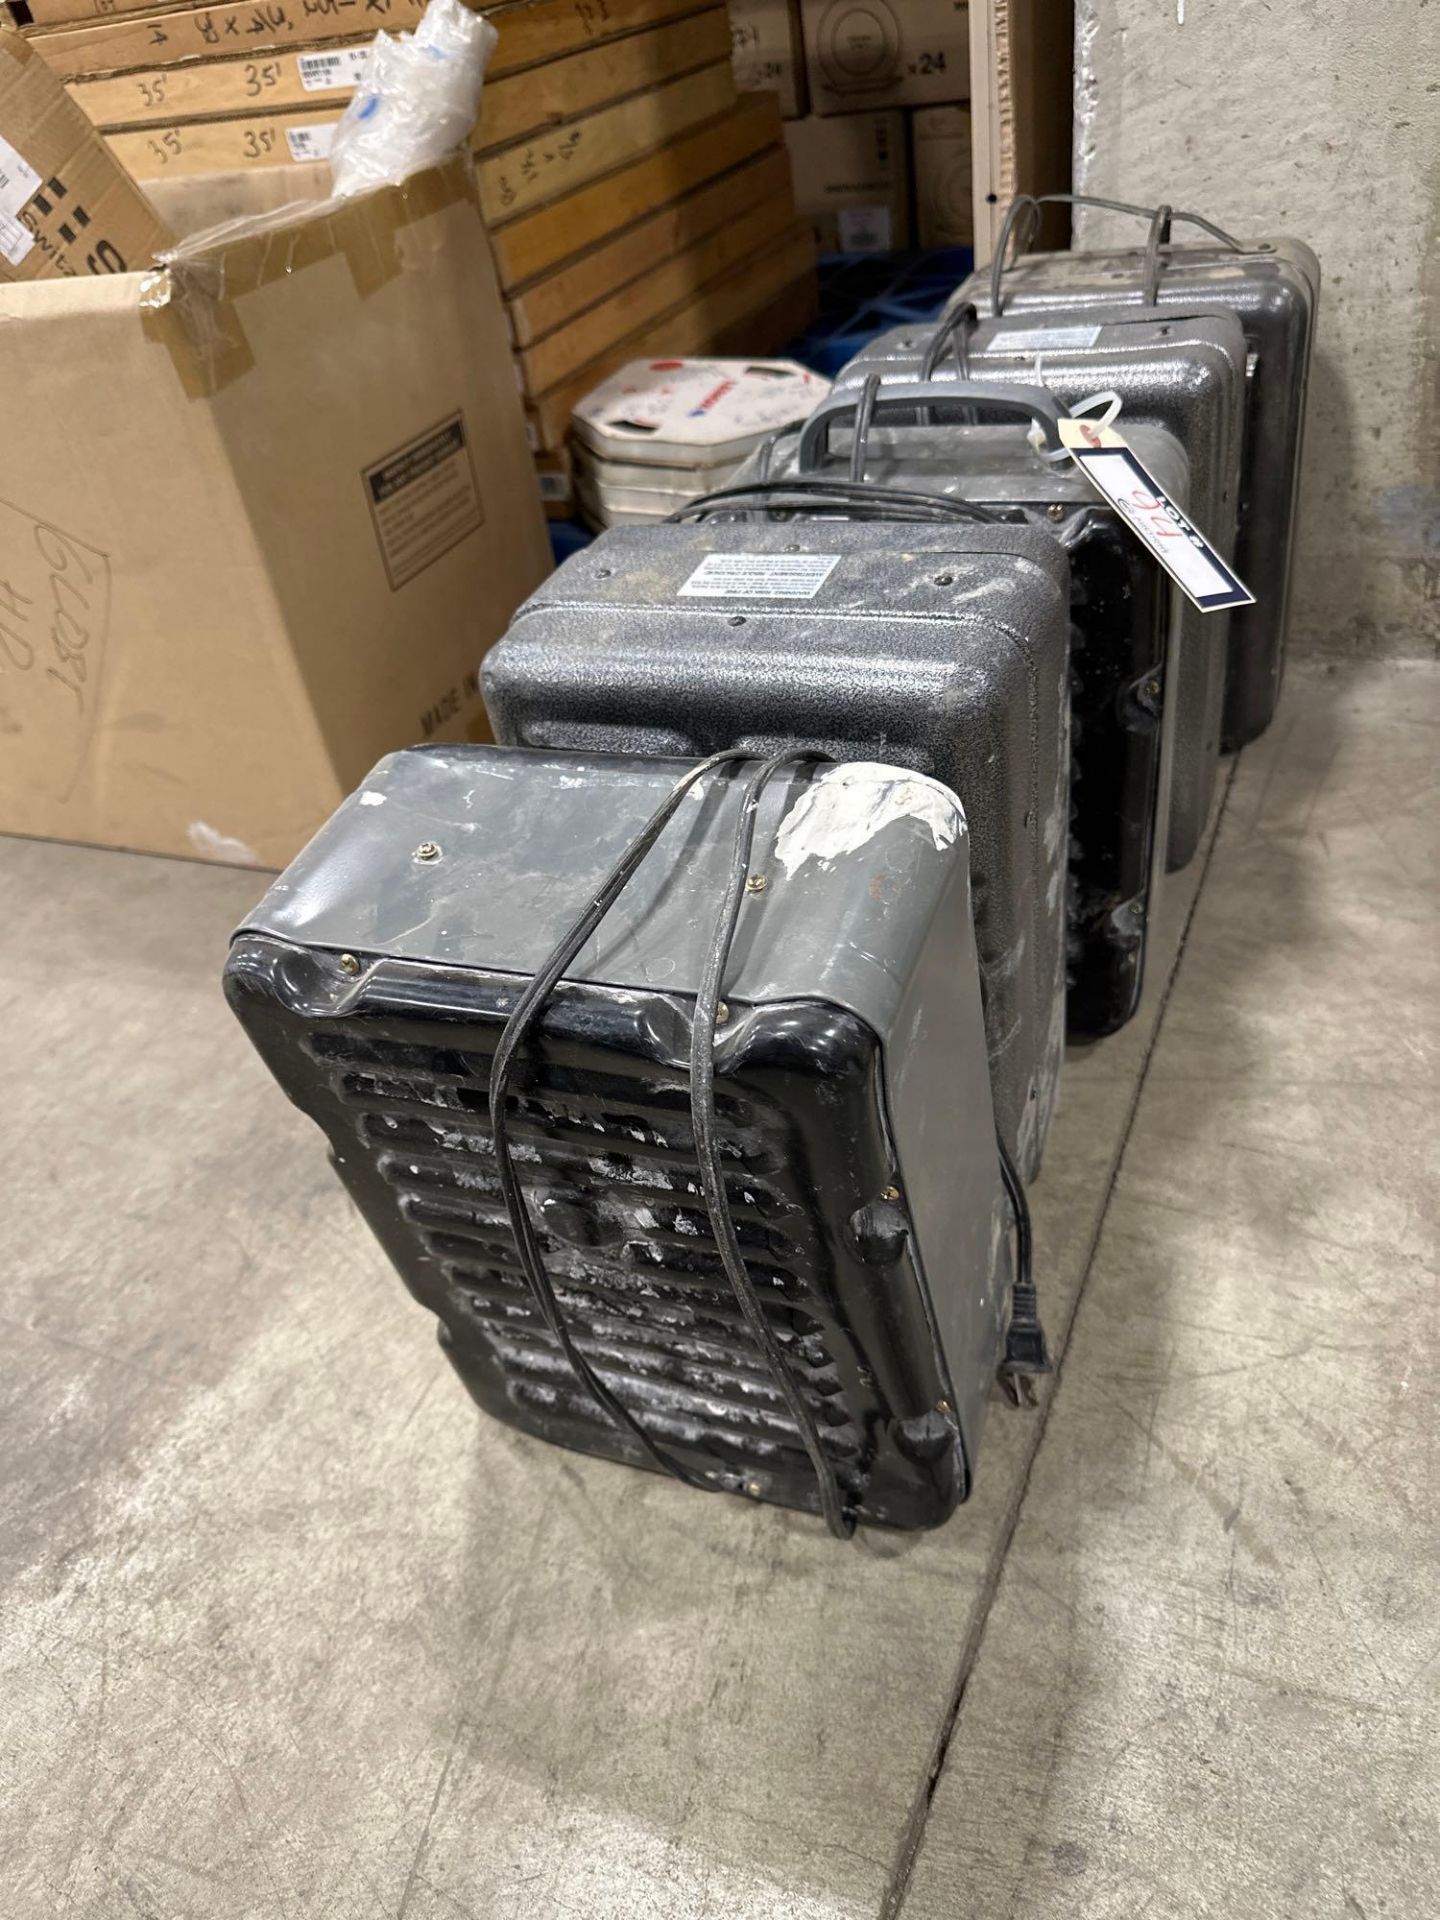 Lot of (4) Asst. Space Heaters - Image 2 of 2